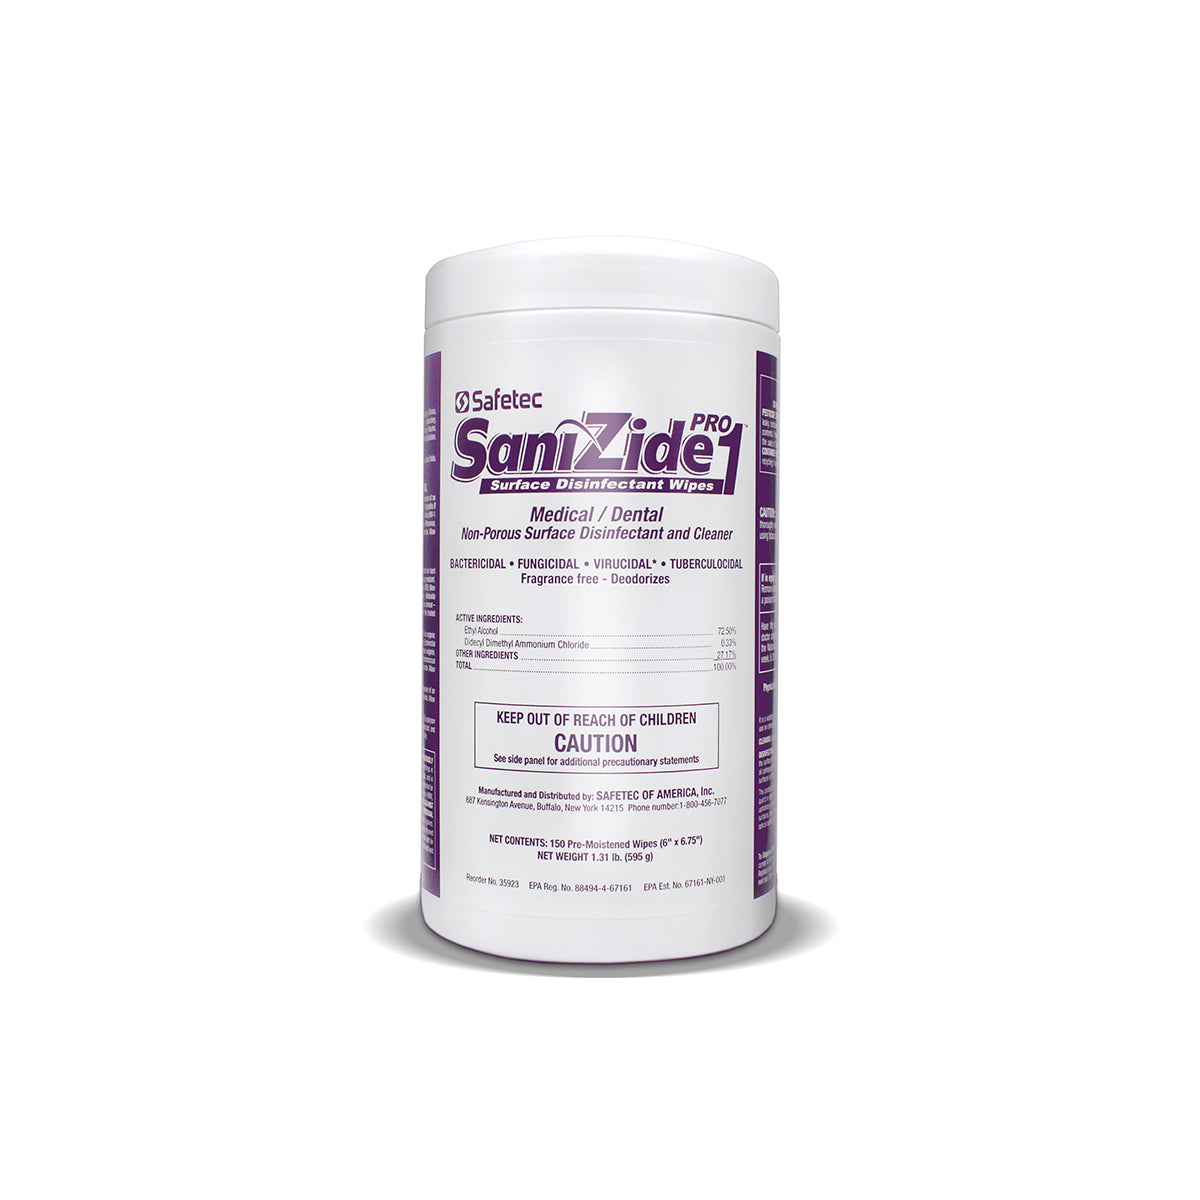 SafeTec - SaniZide Pro 1® Surface Disinfectant Wipes - 150ct. Canister data-zoom=